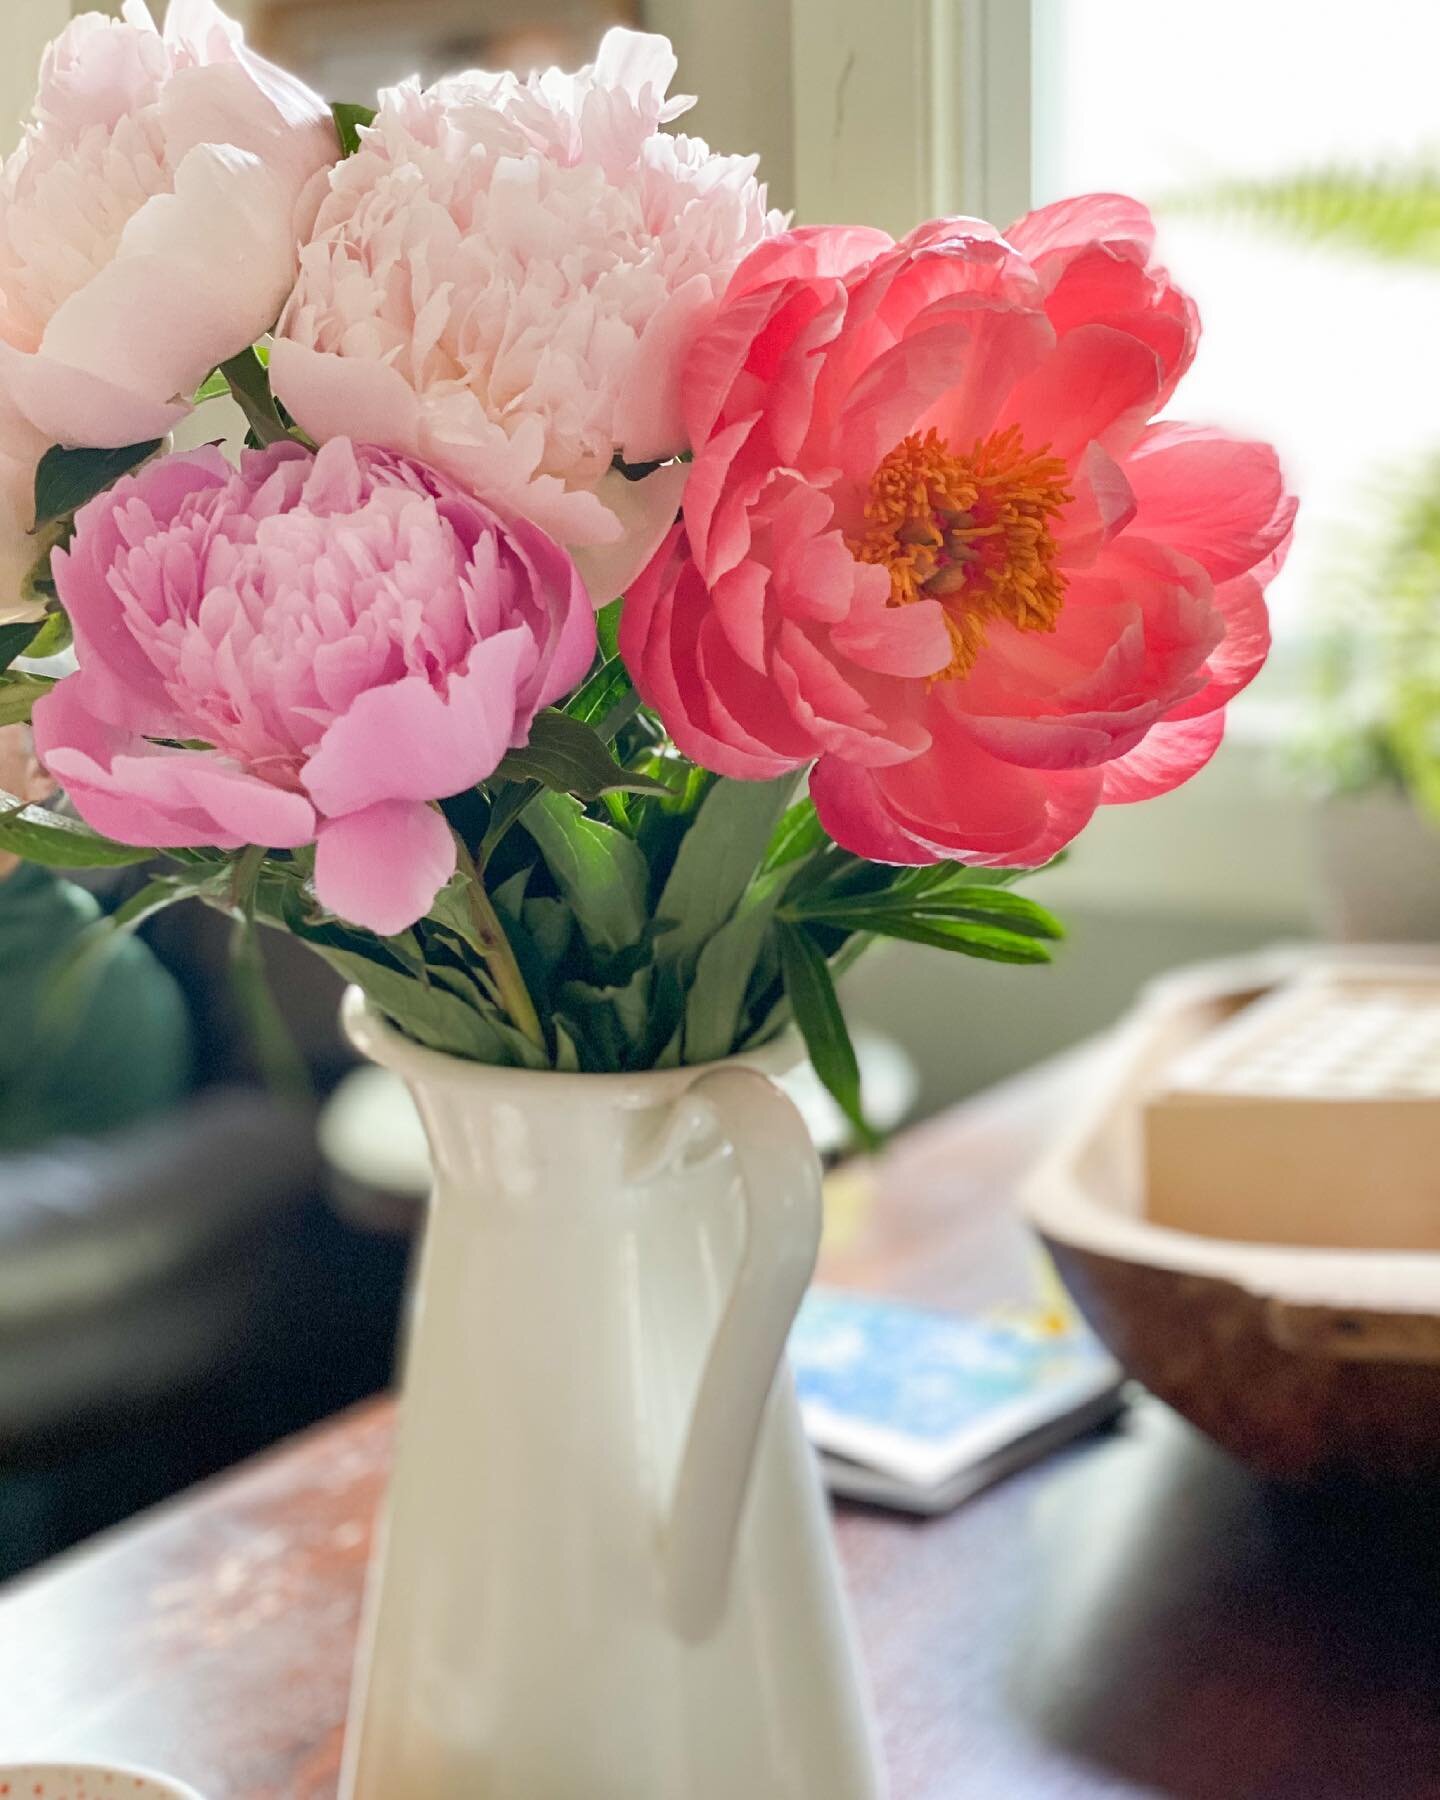 This is a picture of peonies for a post that has nothing to do with peonies 😆 but aren&rsquo;t they gorgeous?! 🥰 I can&rsquo;t get enough.

Grief is hard and weird, and it is true that after the first year it shifts and passing the anniversary is a